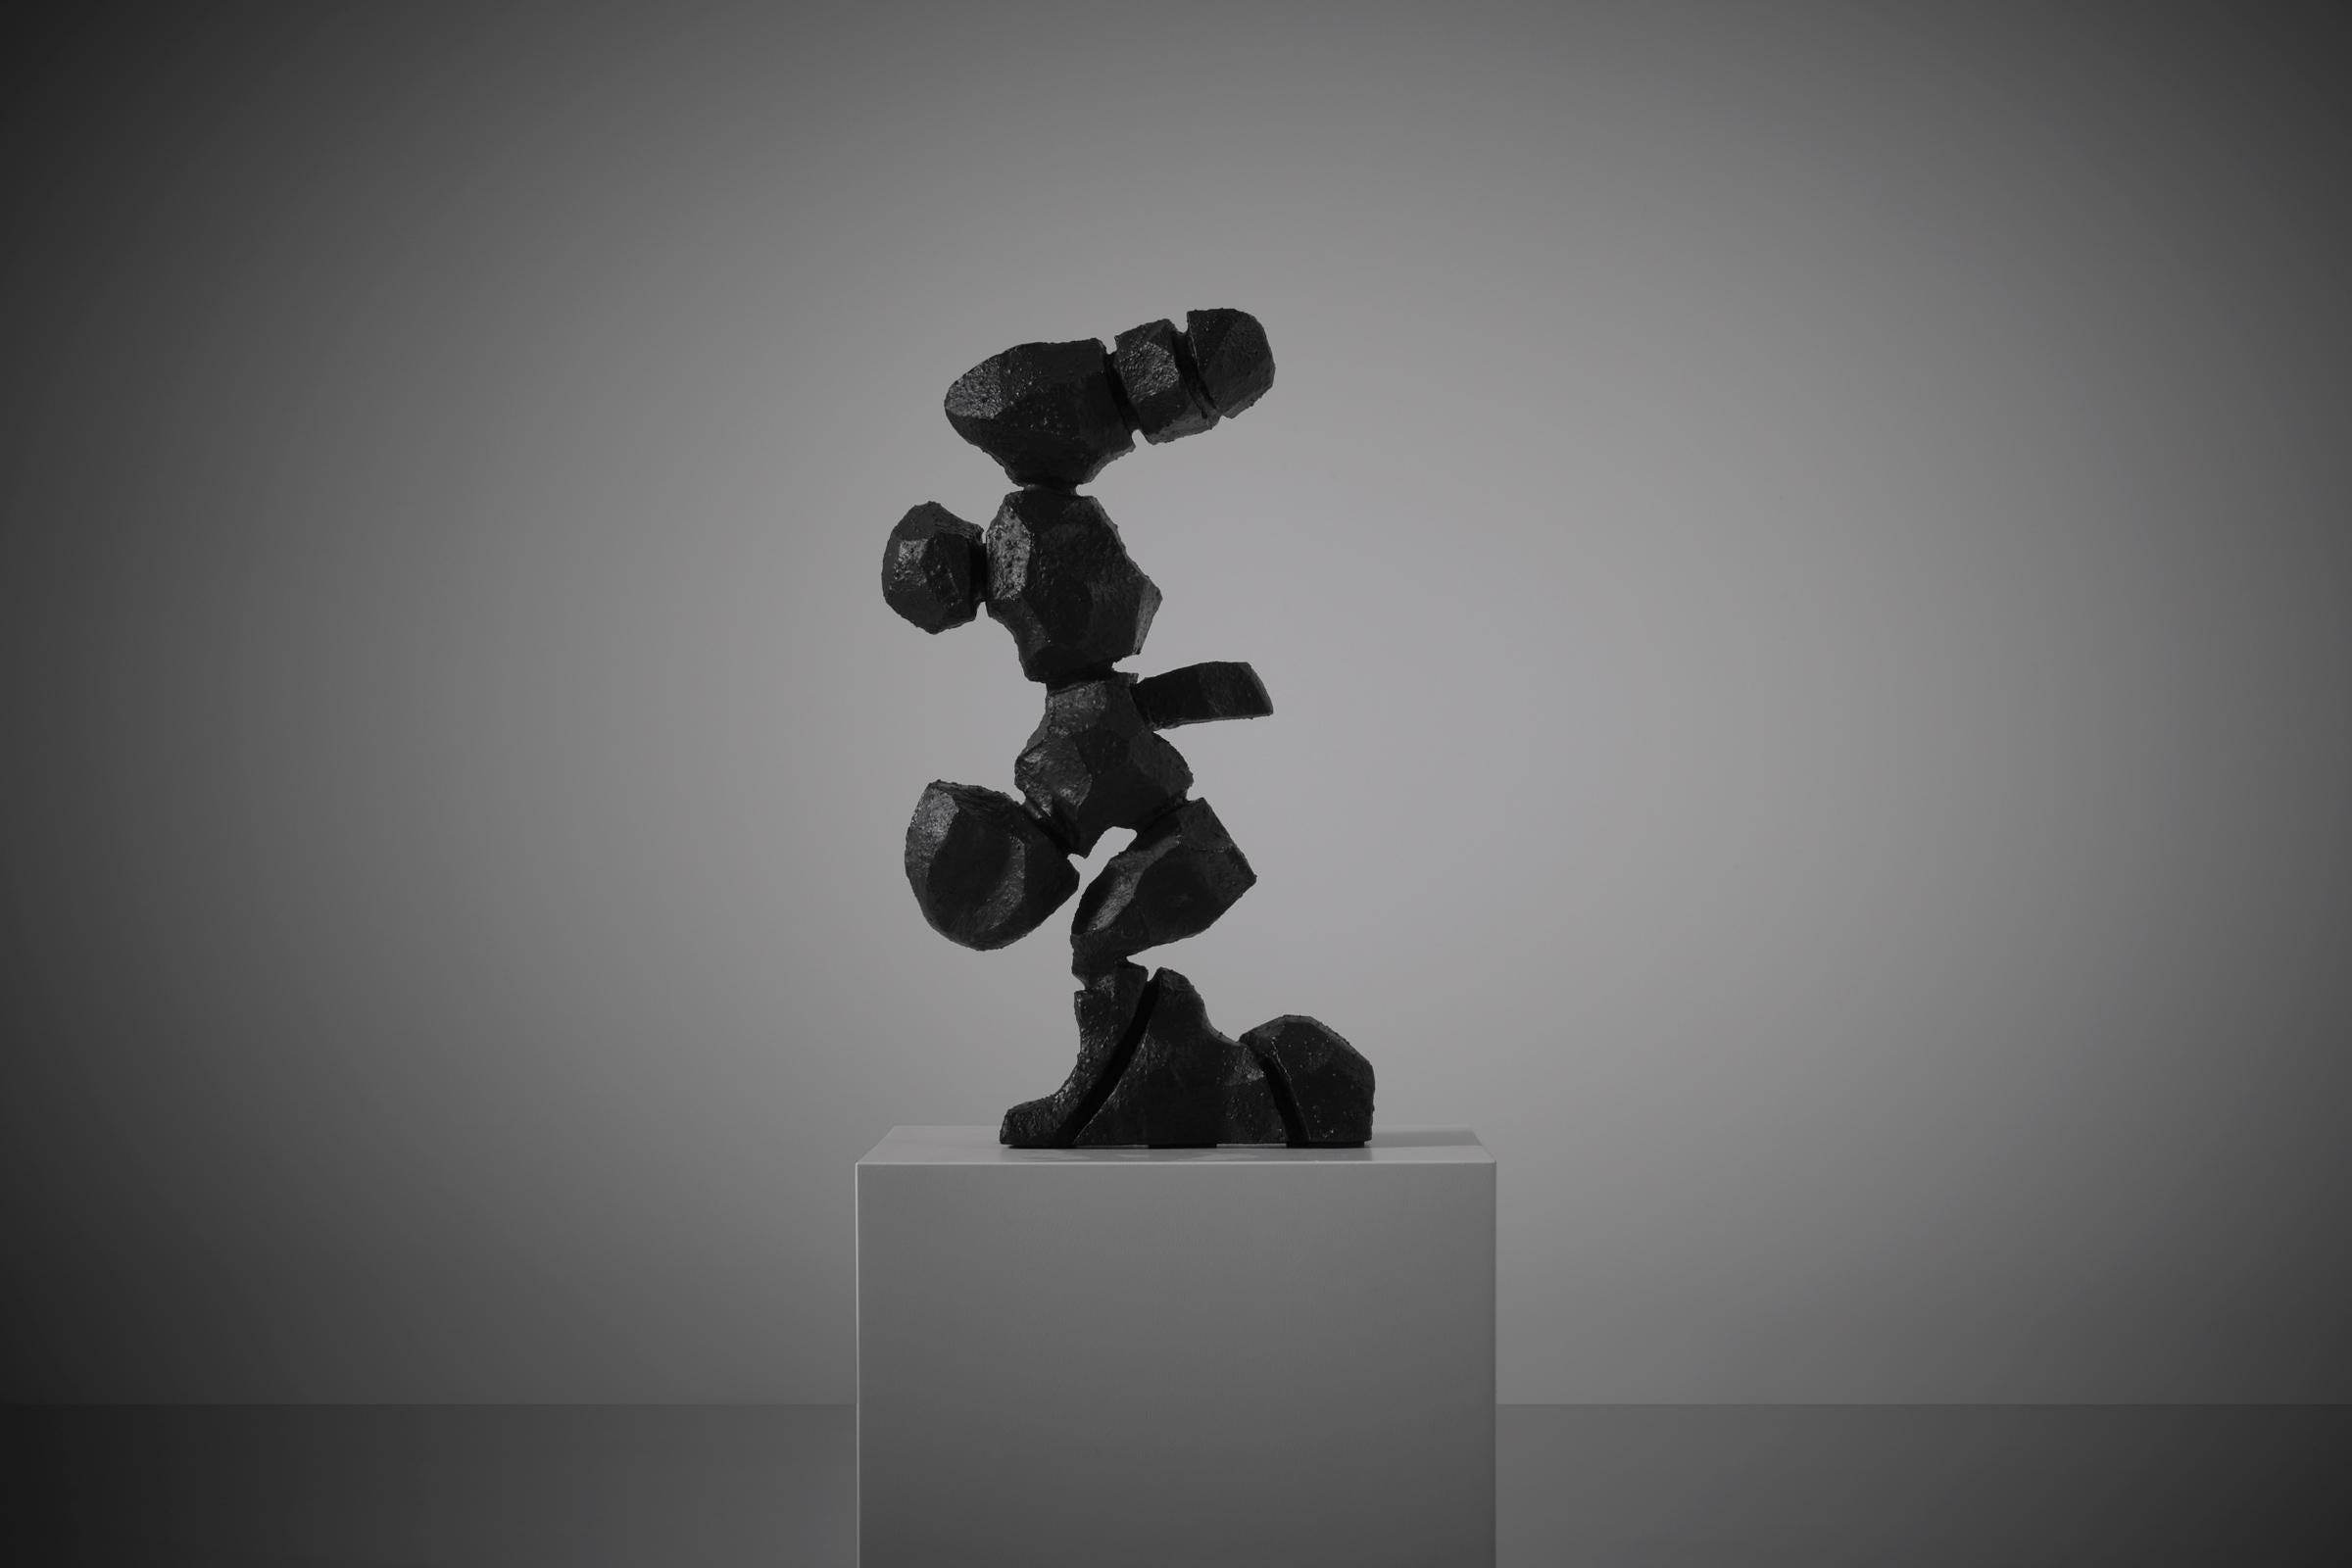 Abstract cast iron sculpture, Spain 1970s. The sculpture is made from heavy solid cast iron with a nice rough black stained structured surface. Interesting presentation of abstract cactus or eroded rocks shaped forms which are playing with the